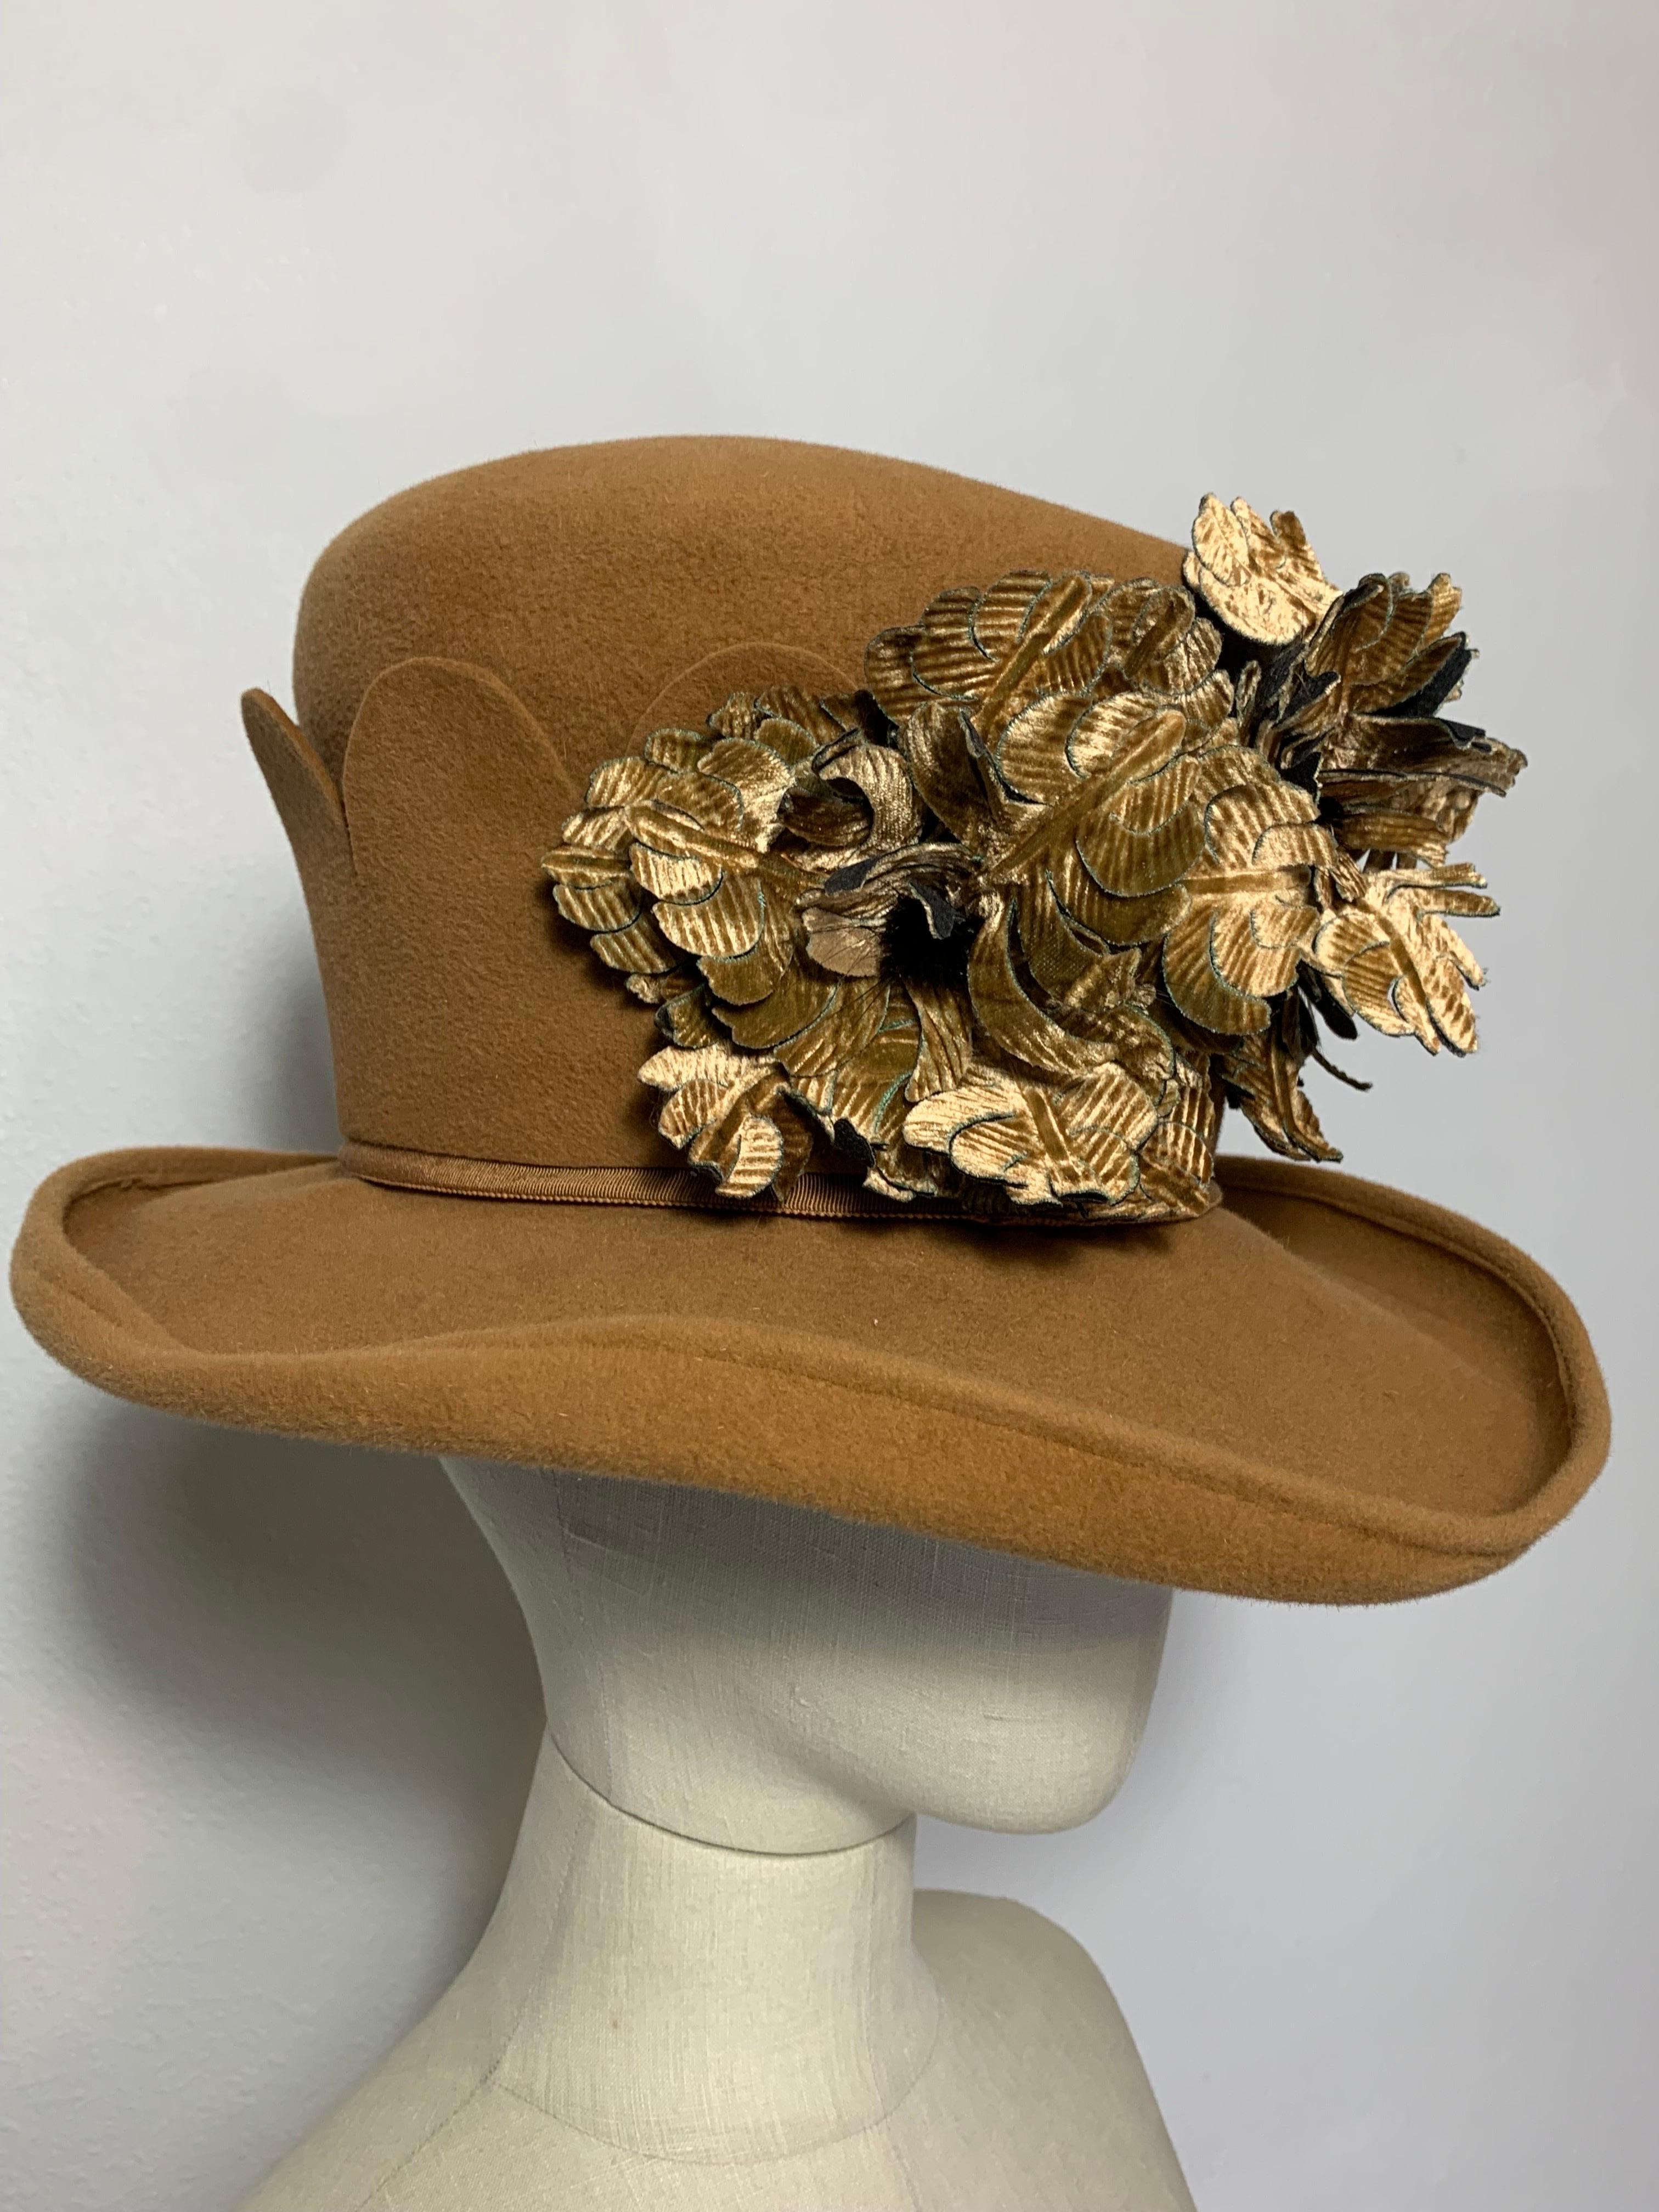 Maison Michel Autumn/Winter Medium Brim Caramel Felt Beautifully Blocked High Top Hat with Matching Silk and Velvet Oak Leaves and Wide Scalloped Felt Band: Unlabeled, with attached combs for securing. Size 6 7/8 Medium. Made in France. 

Please